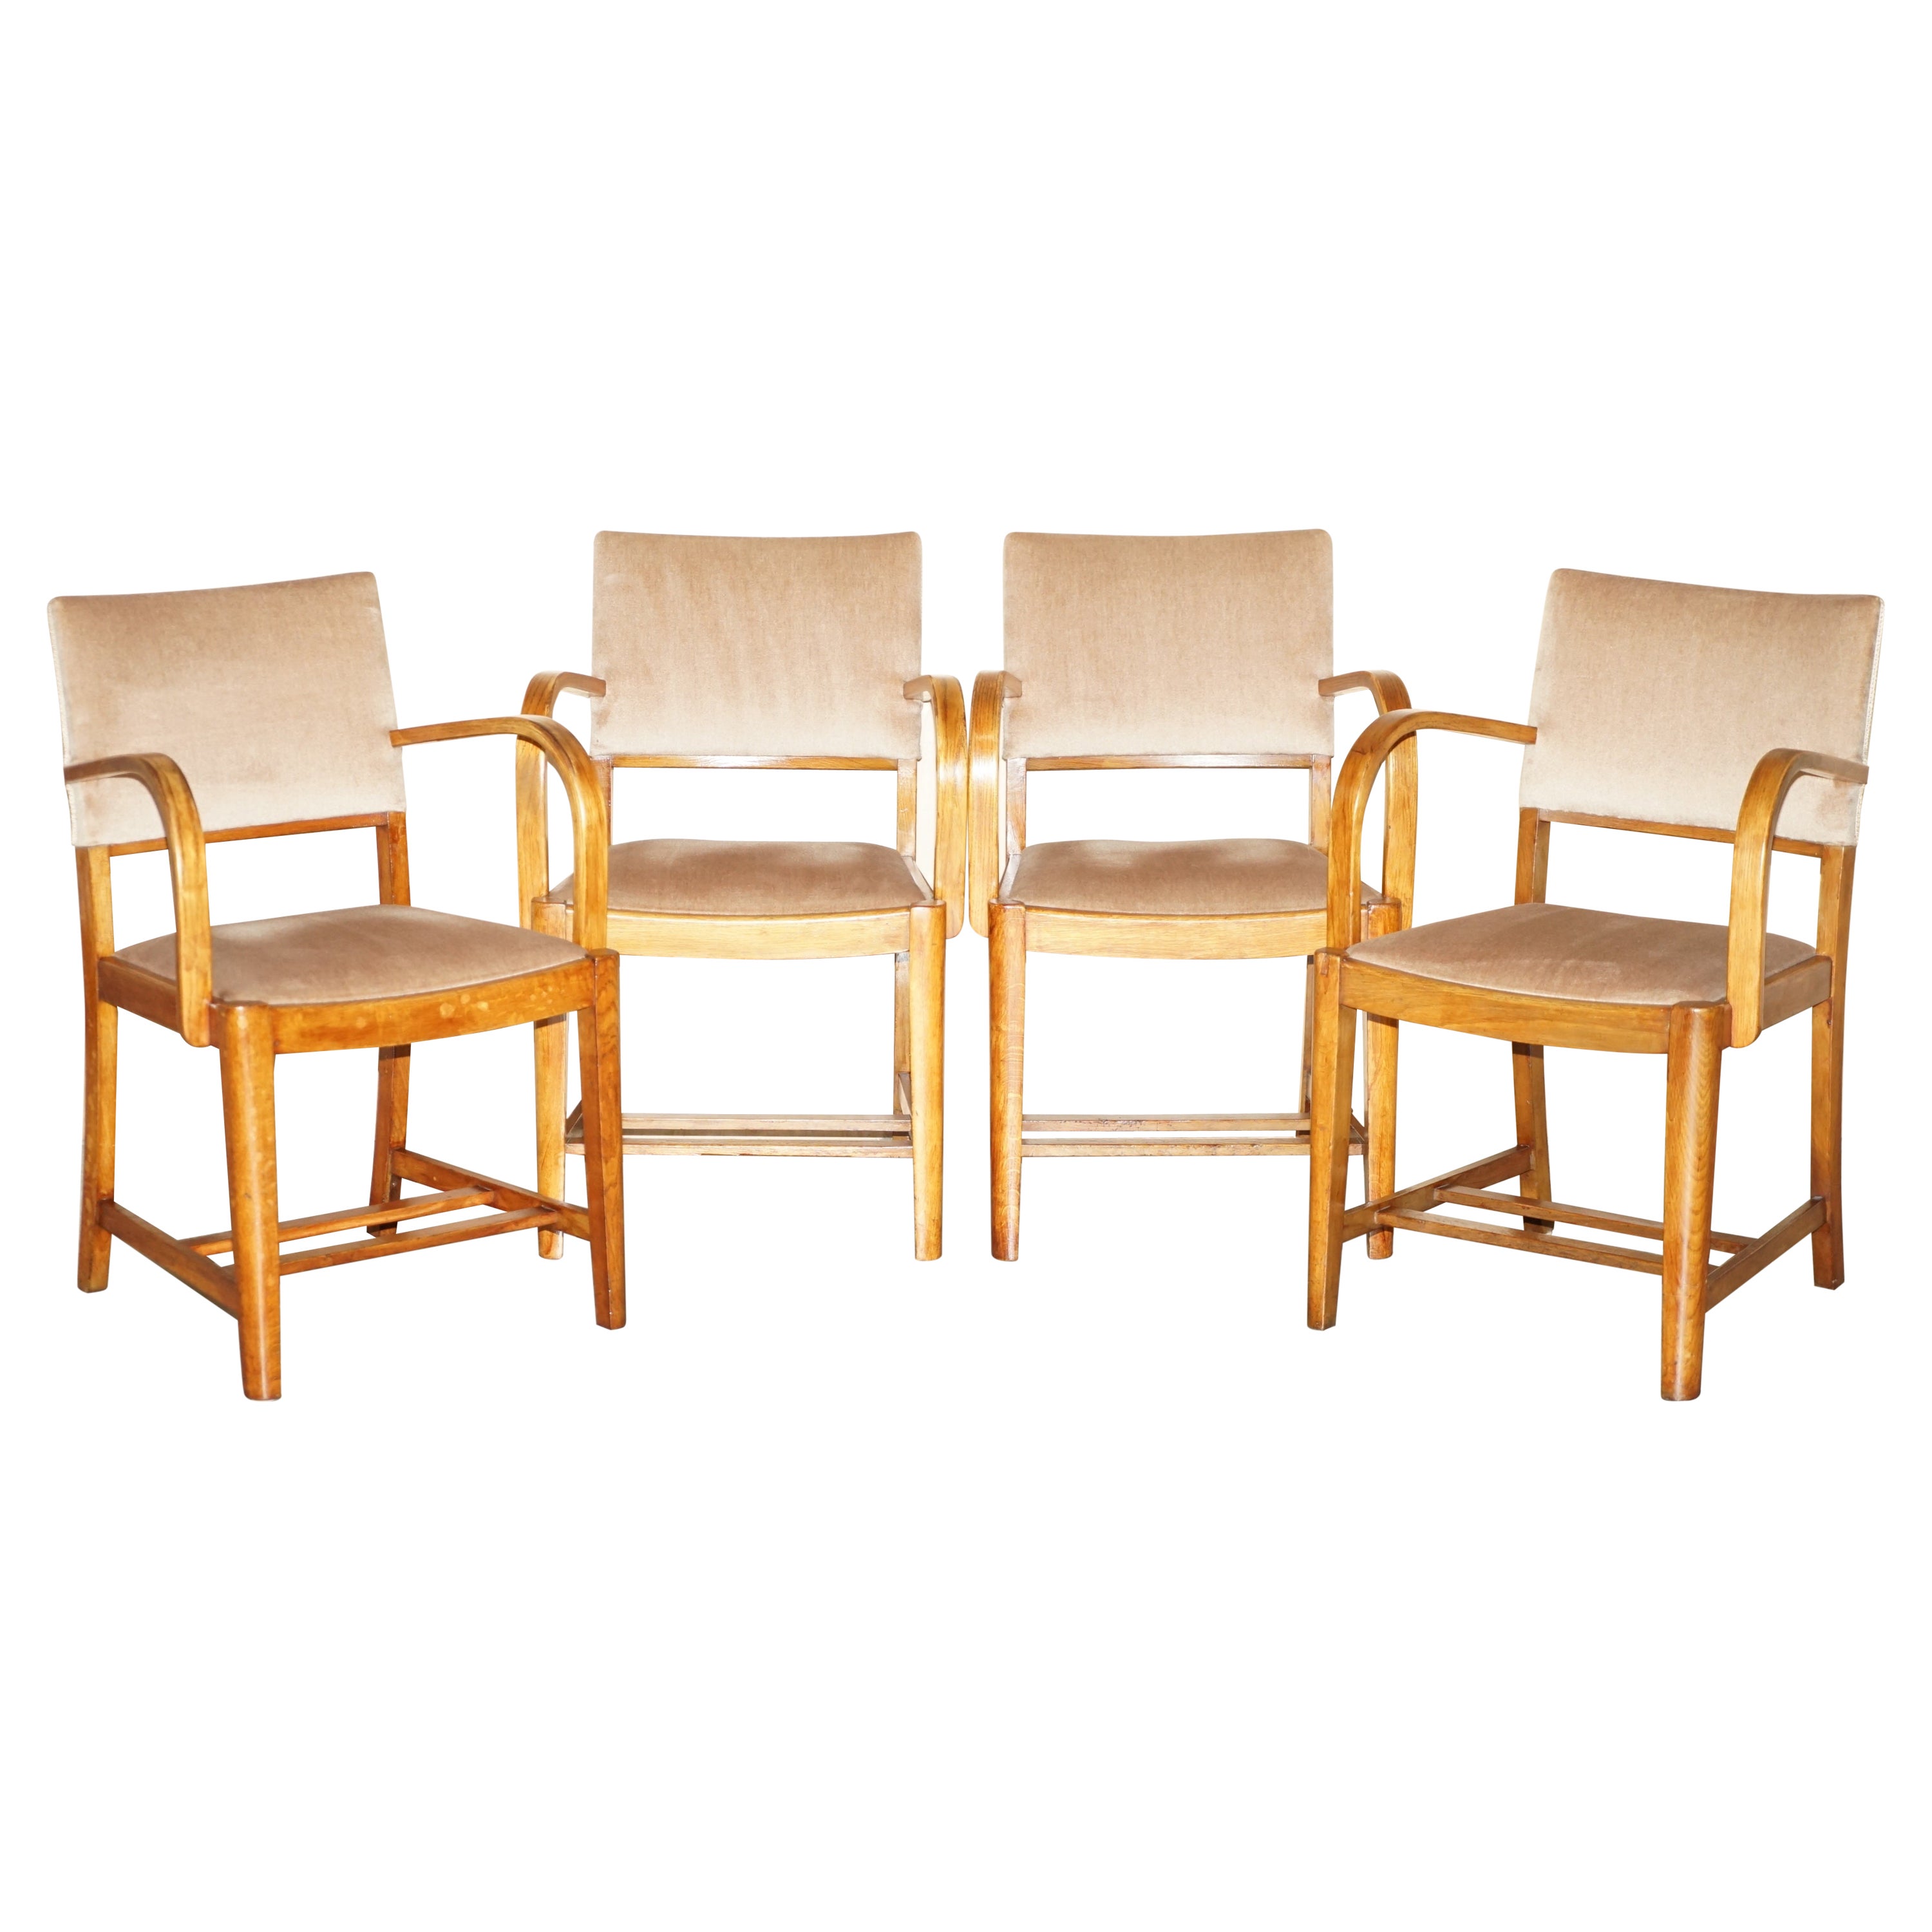 Four Dining Chairs from Rms Queen Mary ii Cunard White Star Liner Cruise Ship For Sale